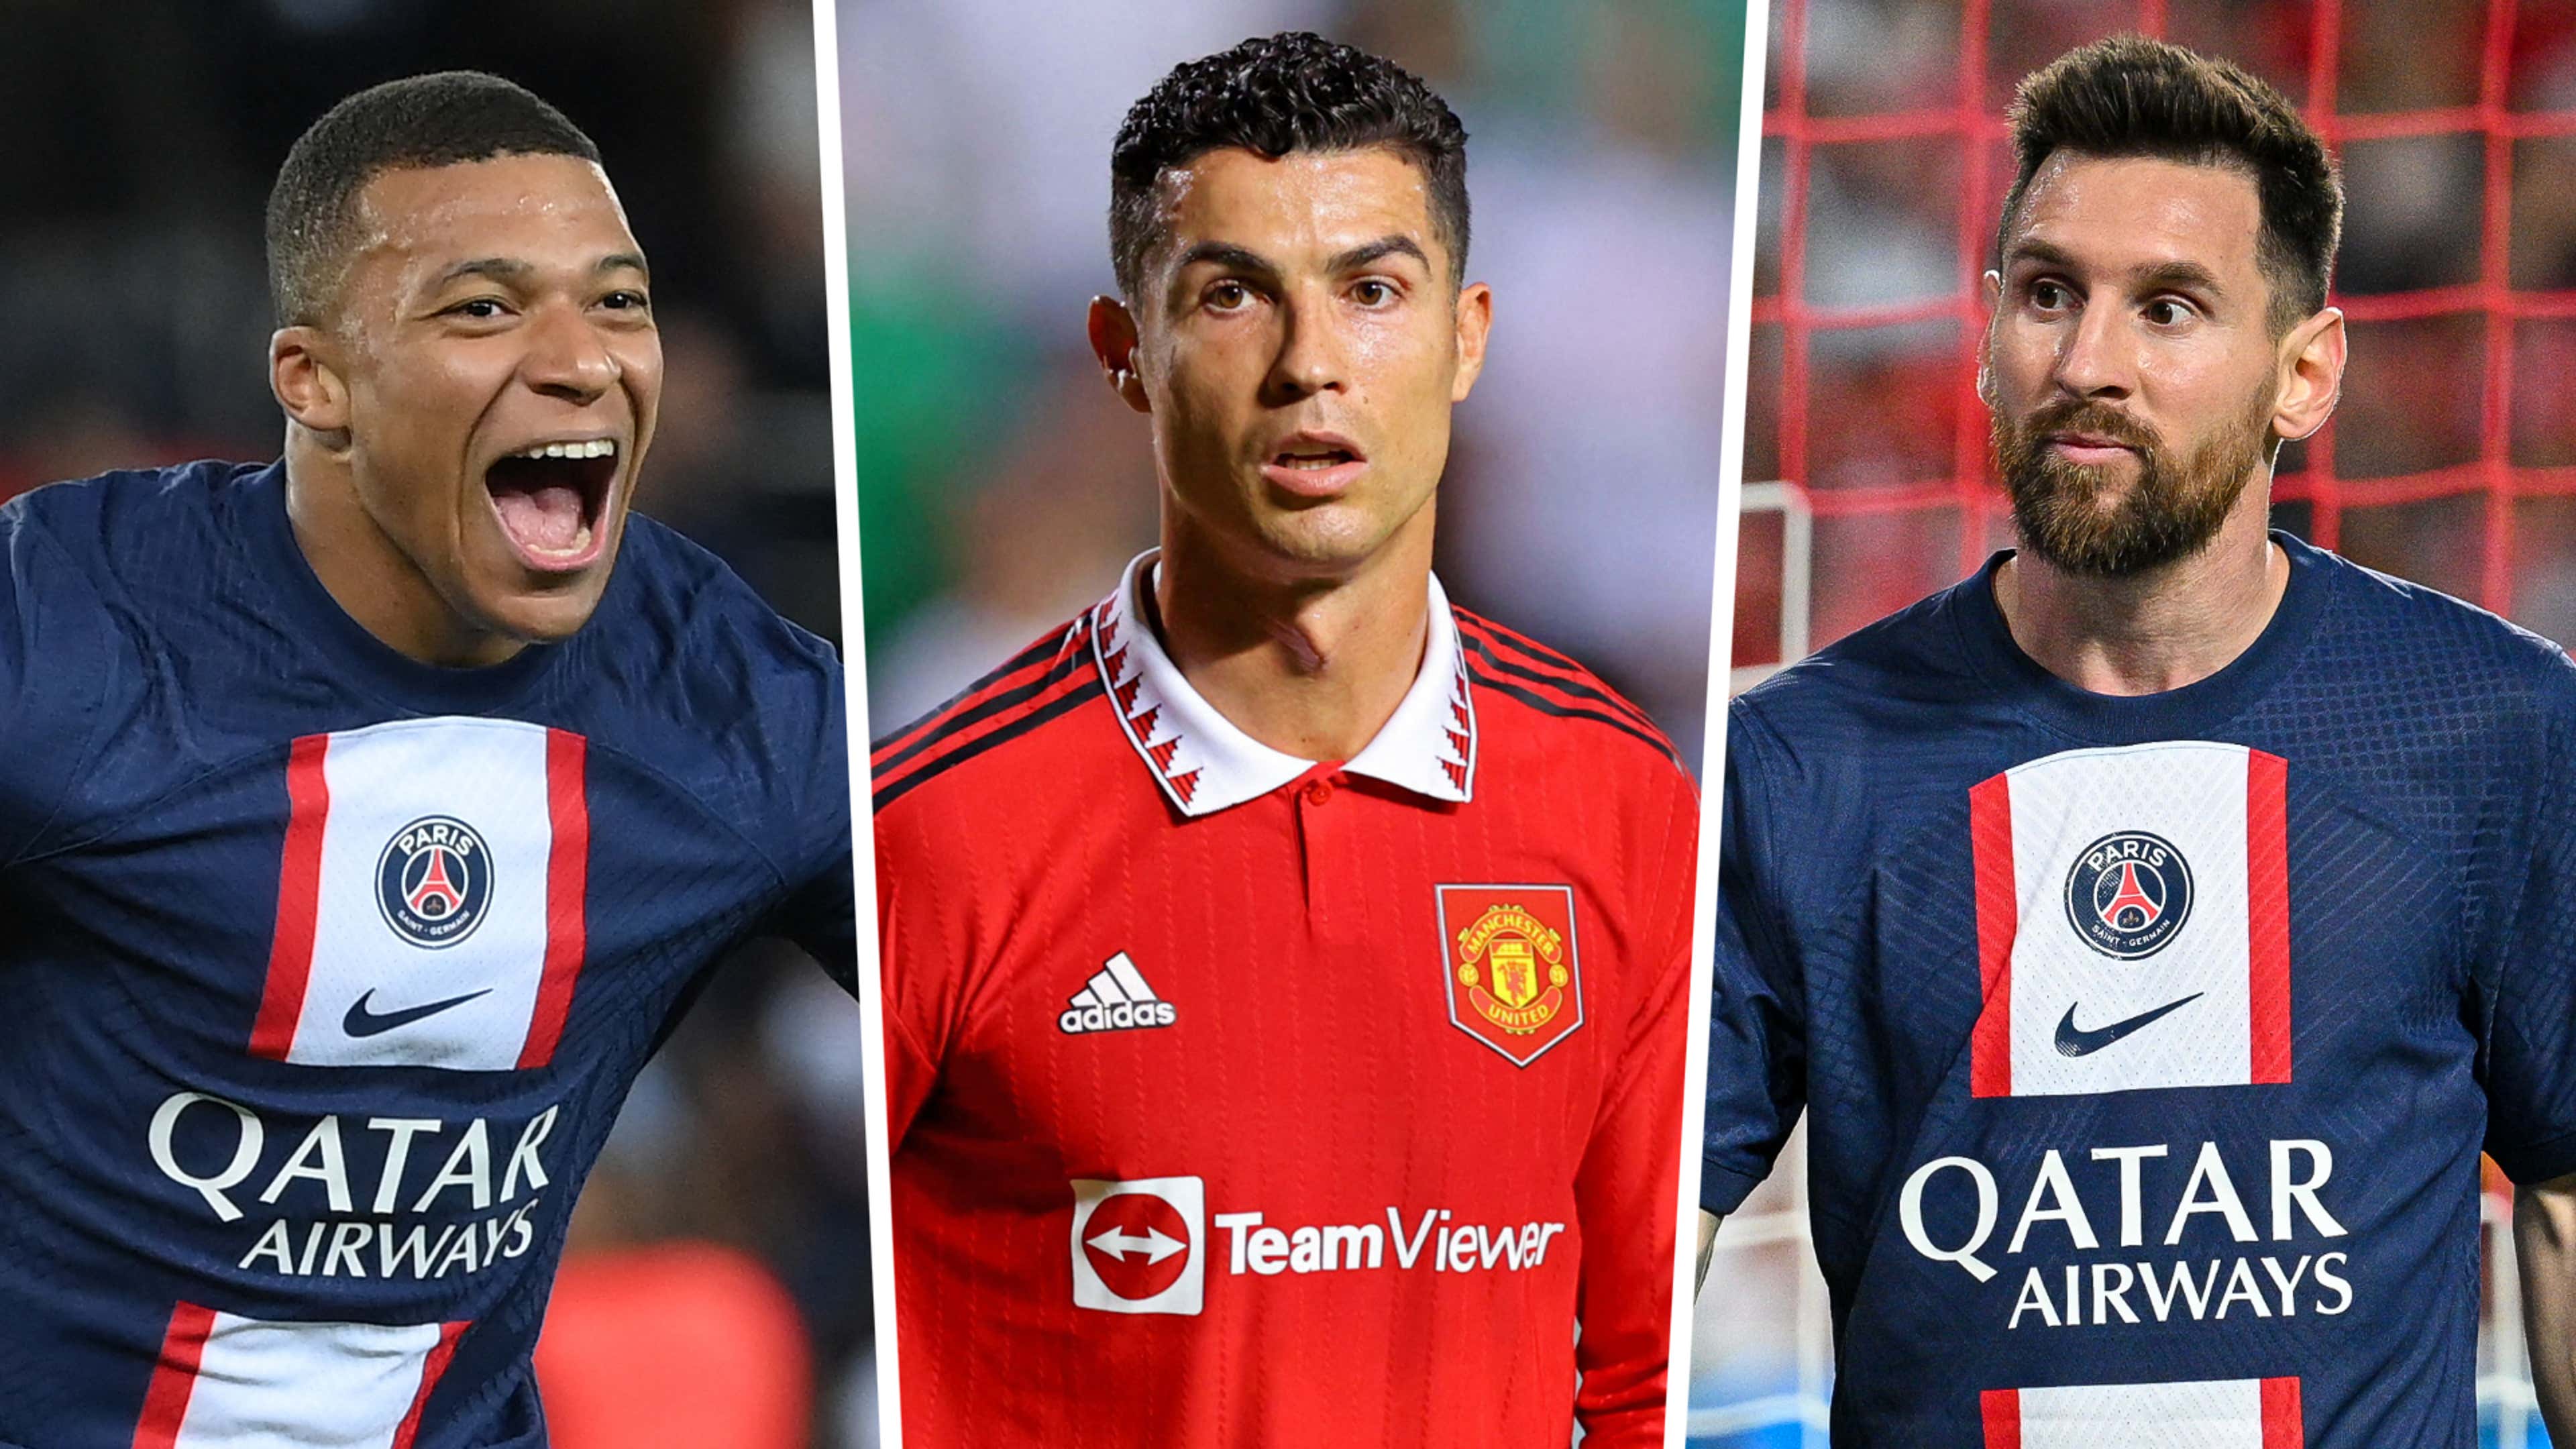 Highest-Paid Soccer Players 2022: Mbappe Tops Ronaldo, Messi